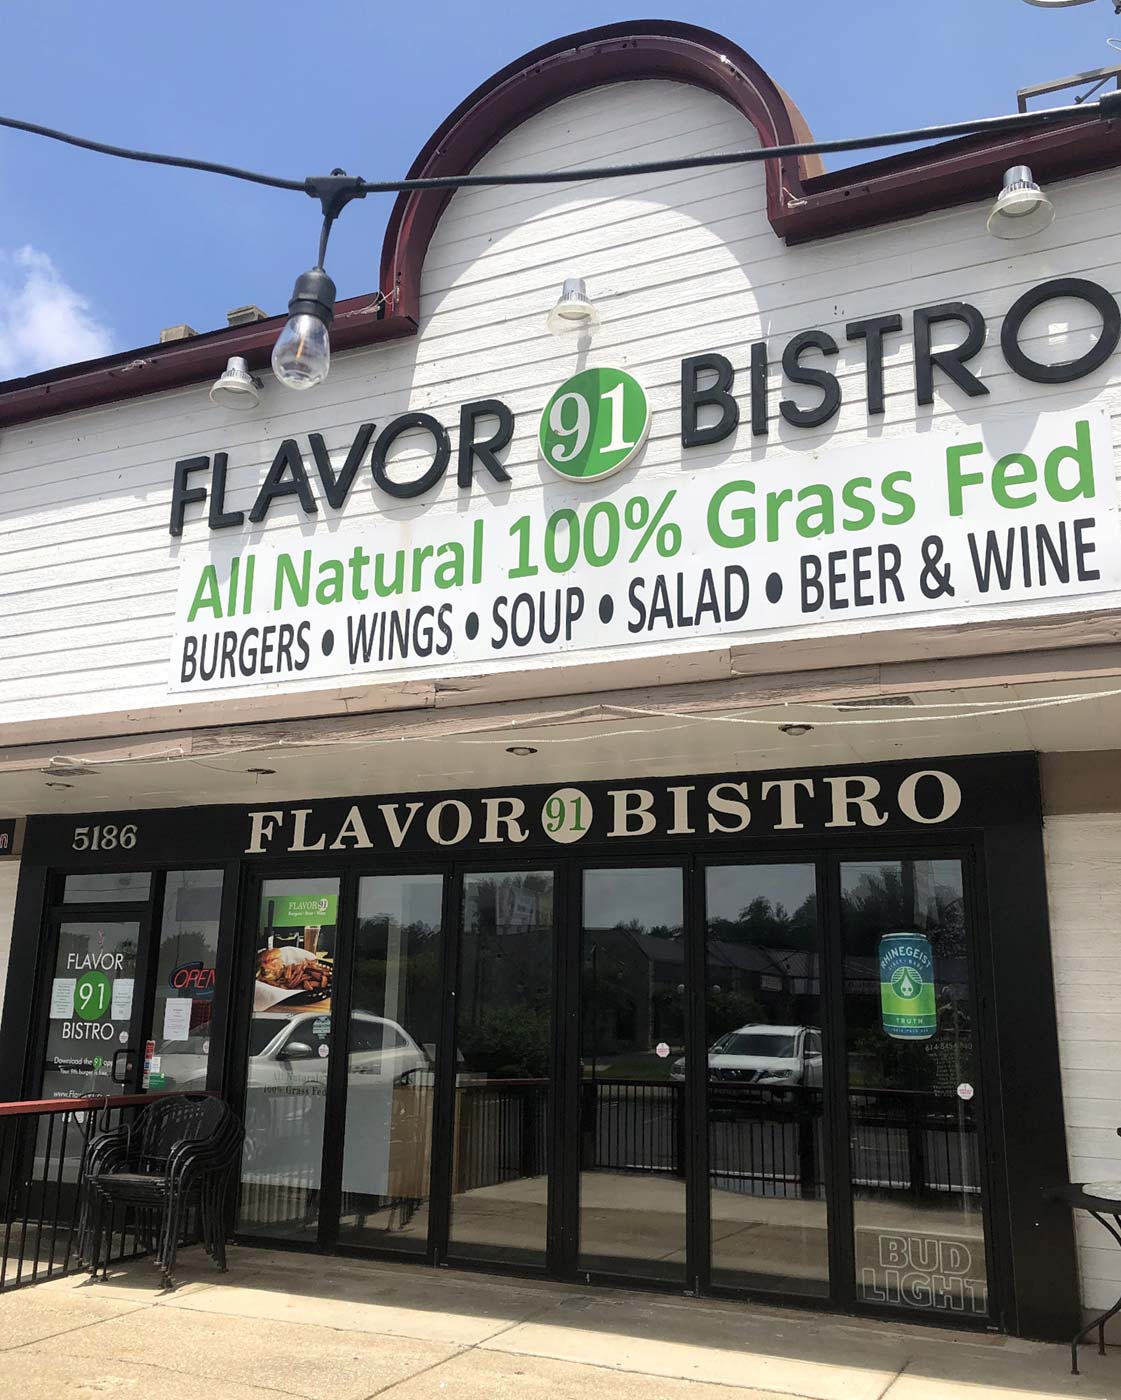 Although the state allowed restaurants to open, Flavor 91 in Whitehall is still studying how to do that safely. Photo by Lauren Kurtz.